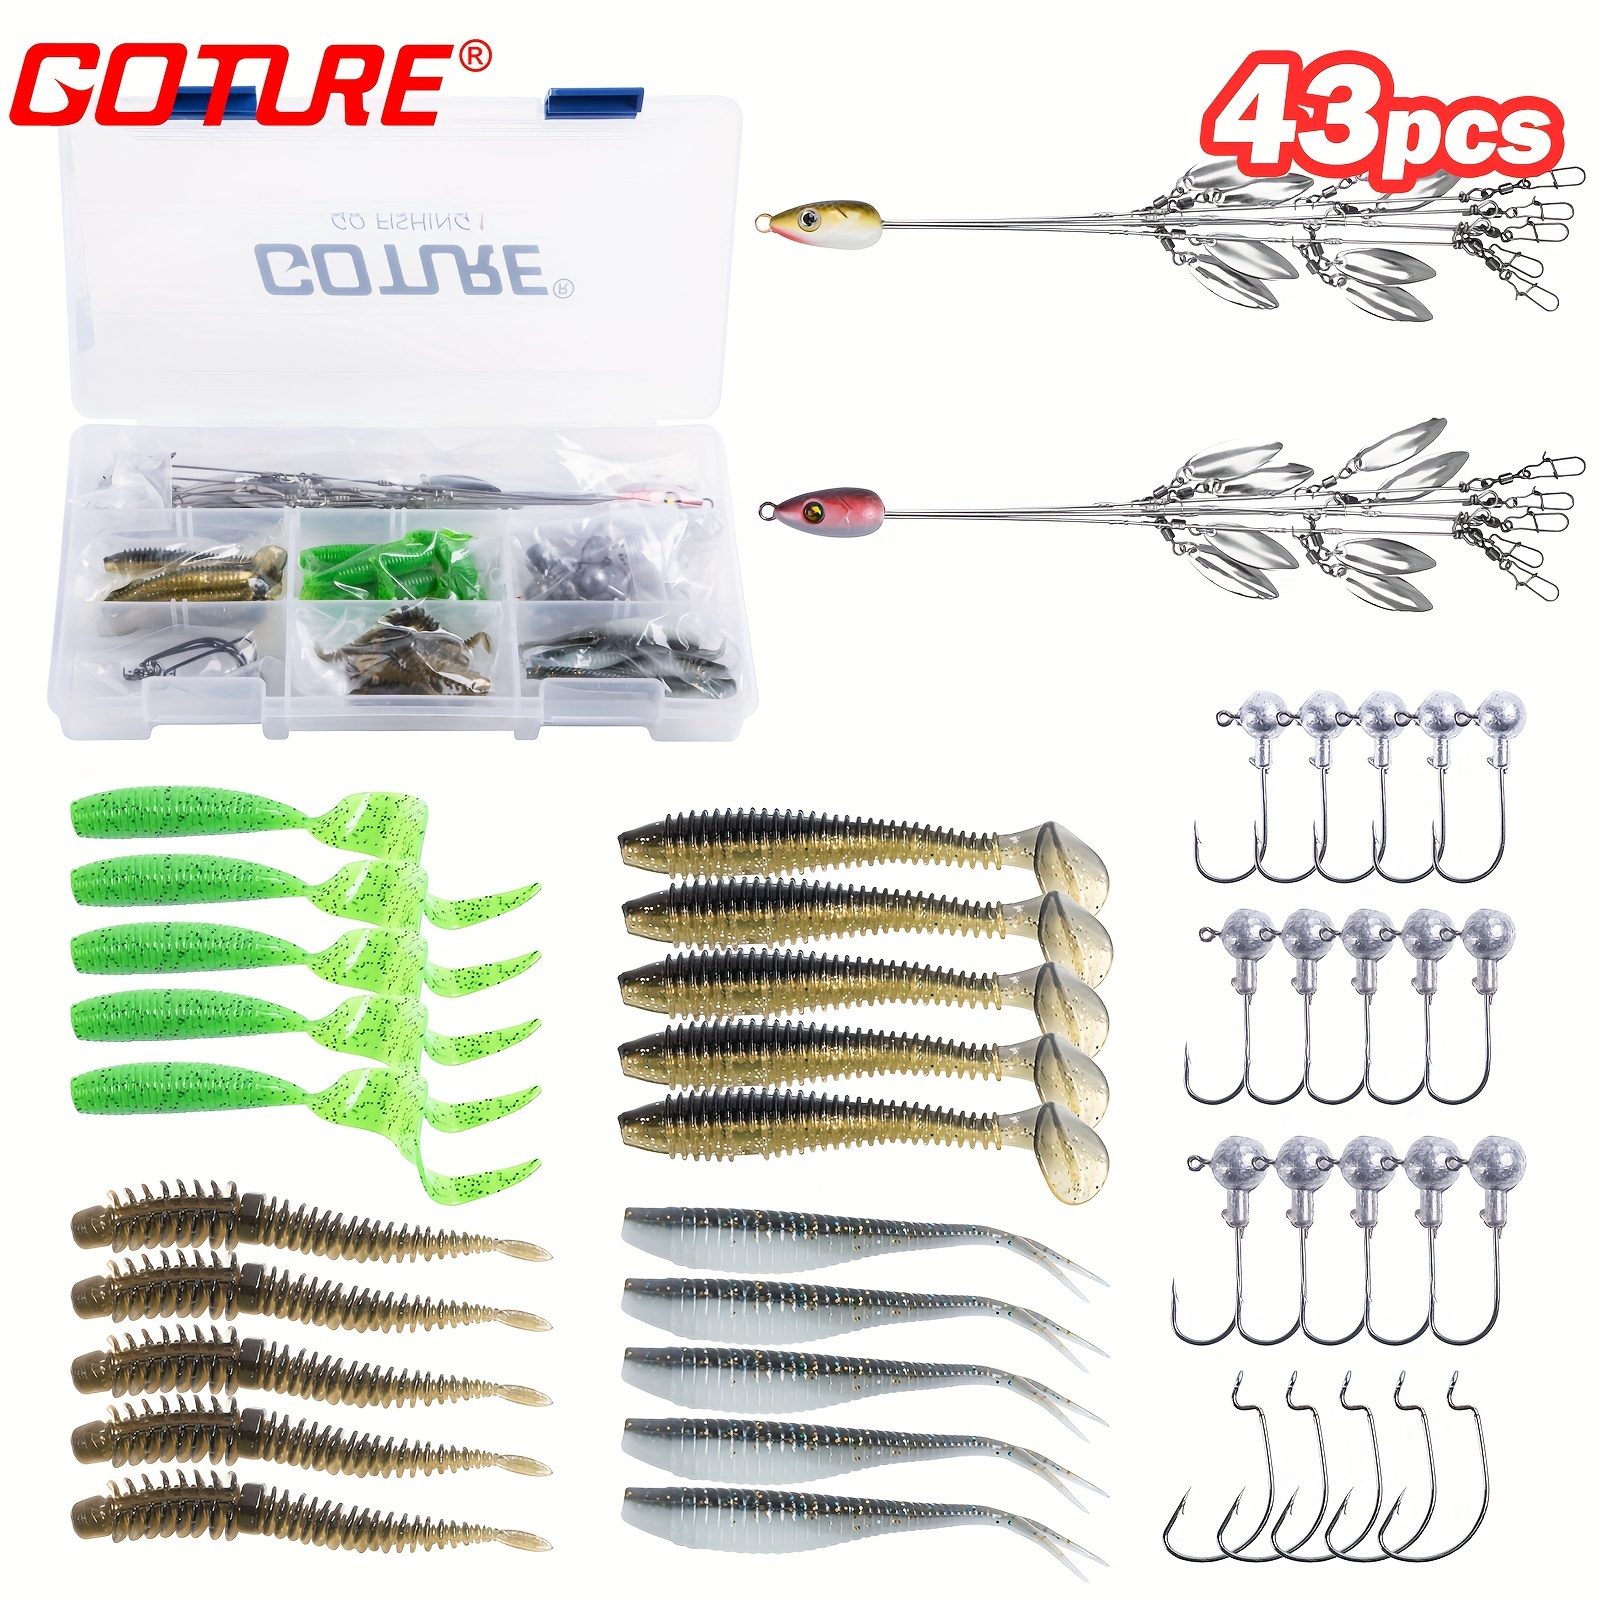 * 43pcs/set Umbrella Rig, Fishing Rigs For Bass Striper, 5-arm Rig With 8  Willow Blades, Fishing Tackle For Trout Perch Walleye Freshwater/Saltwa